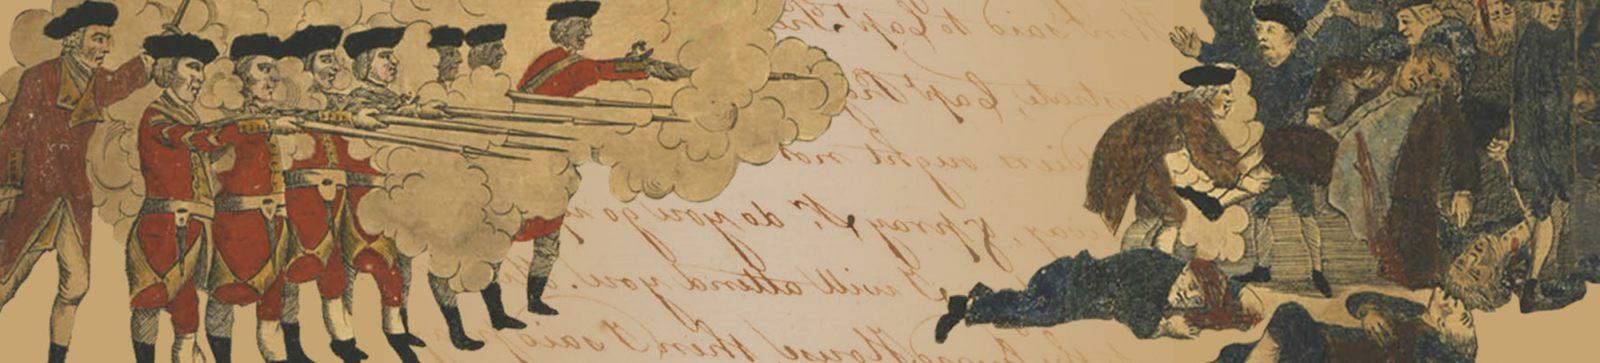 Fire-Voices-from-the-Boston-Massacre_header-for-exhibition-page.jpg